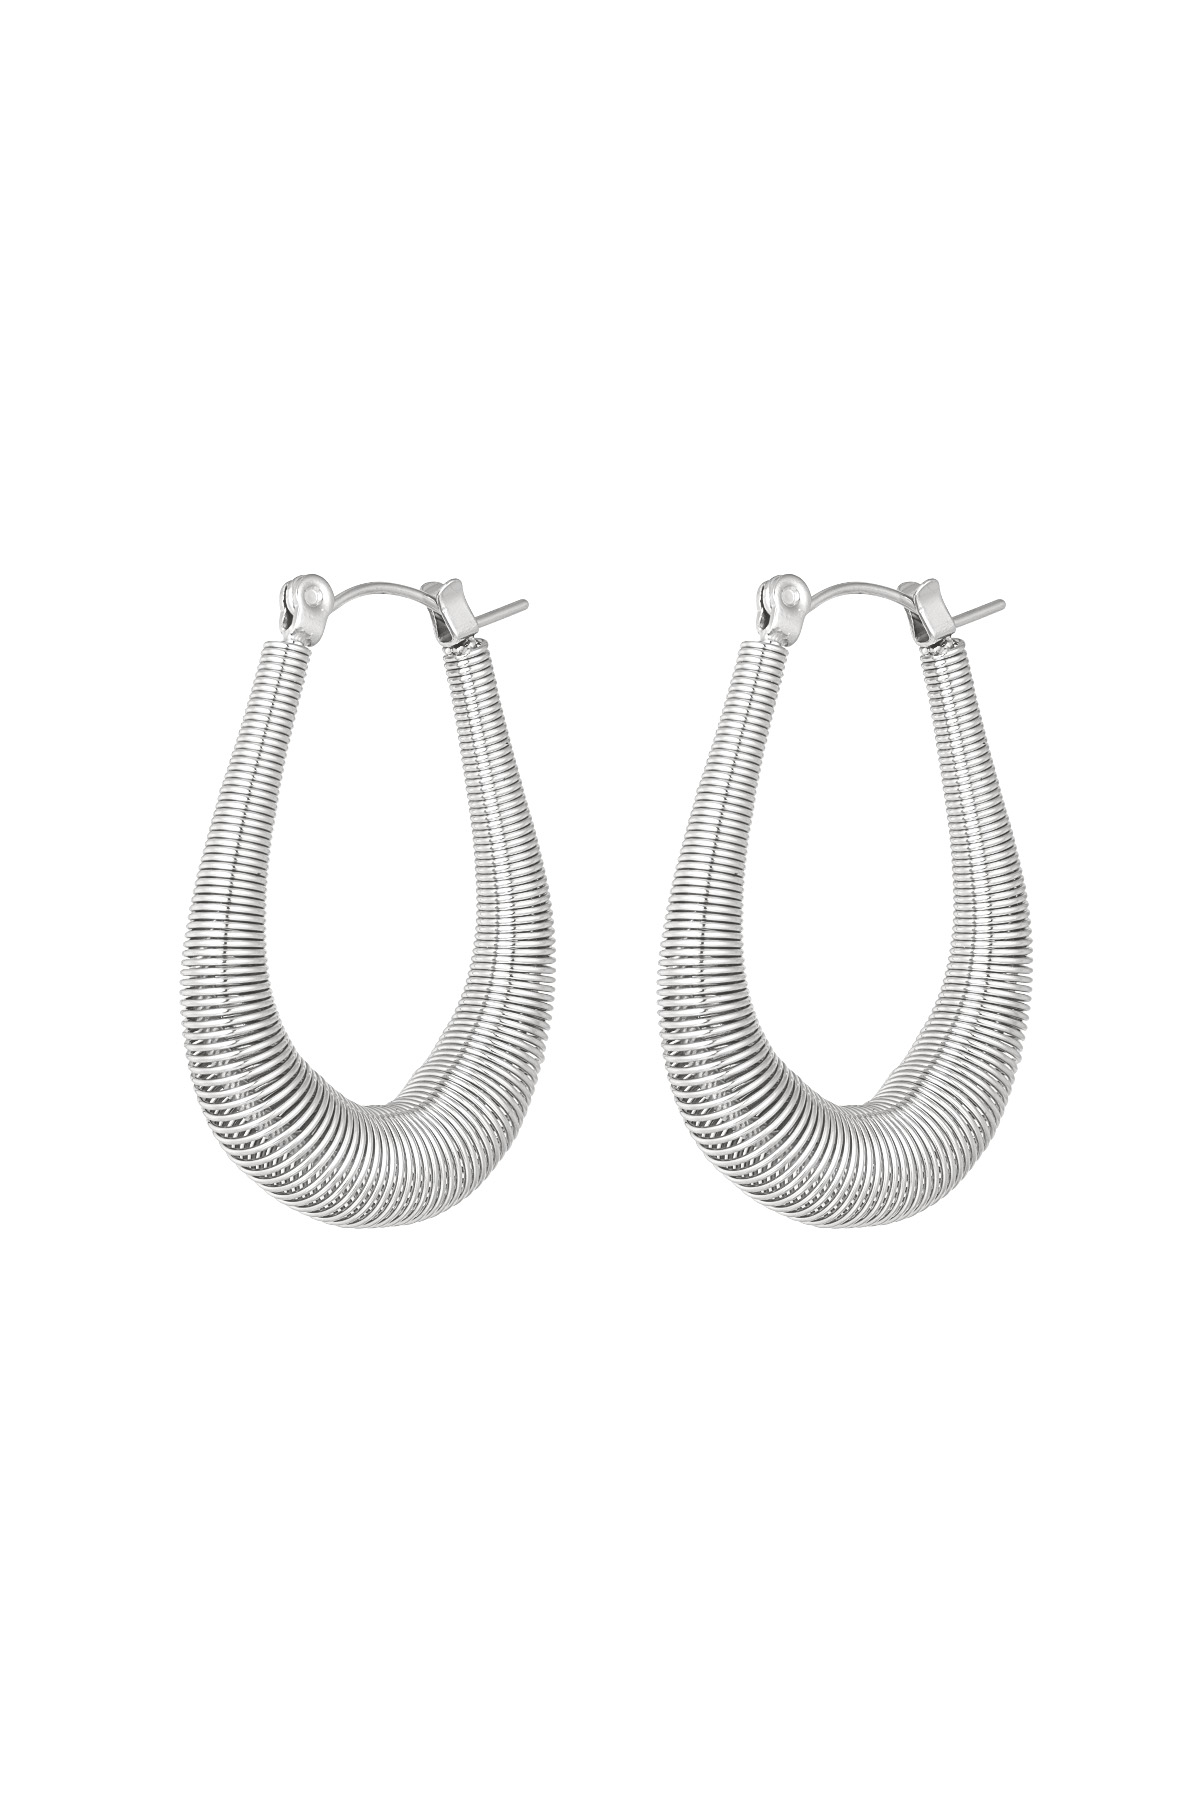 Structured hanging earrings - silver h5 